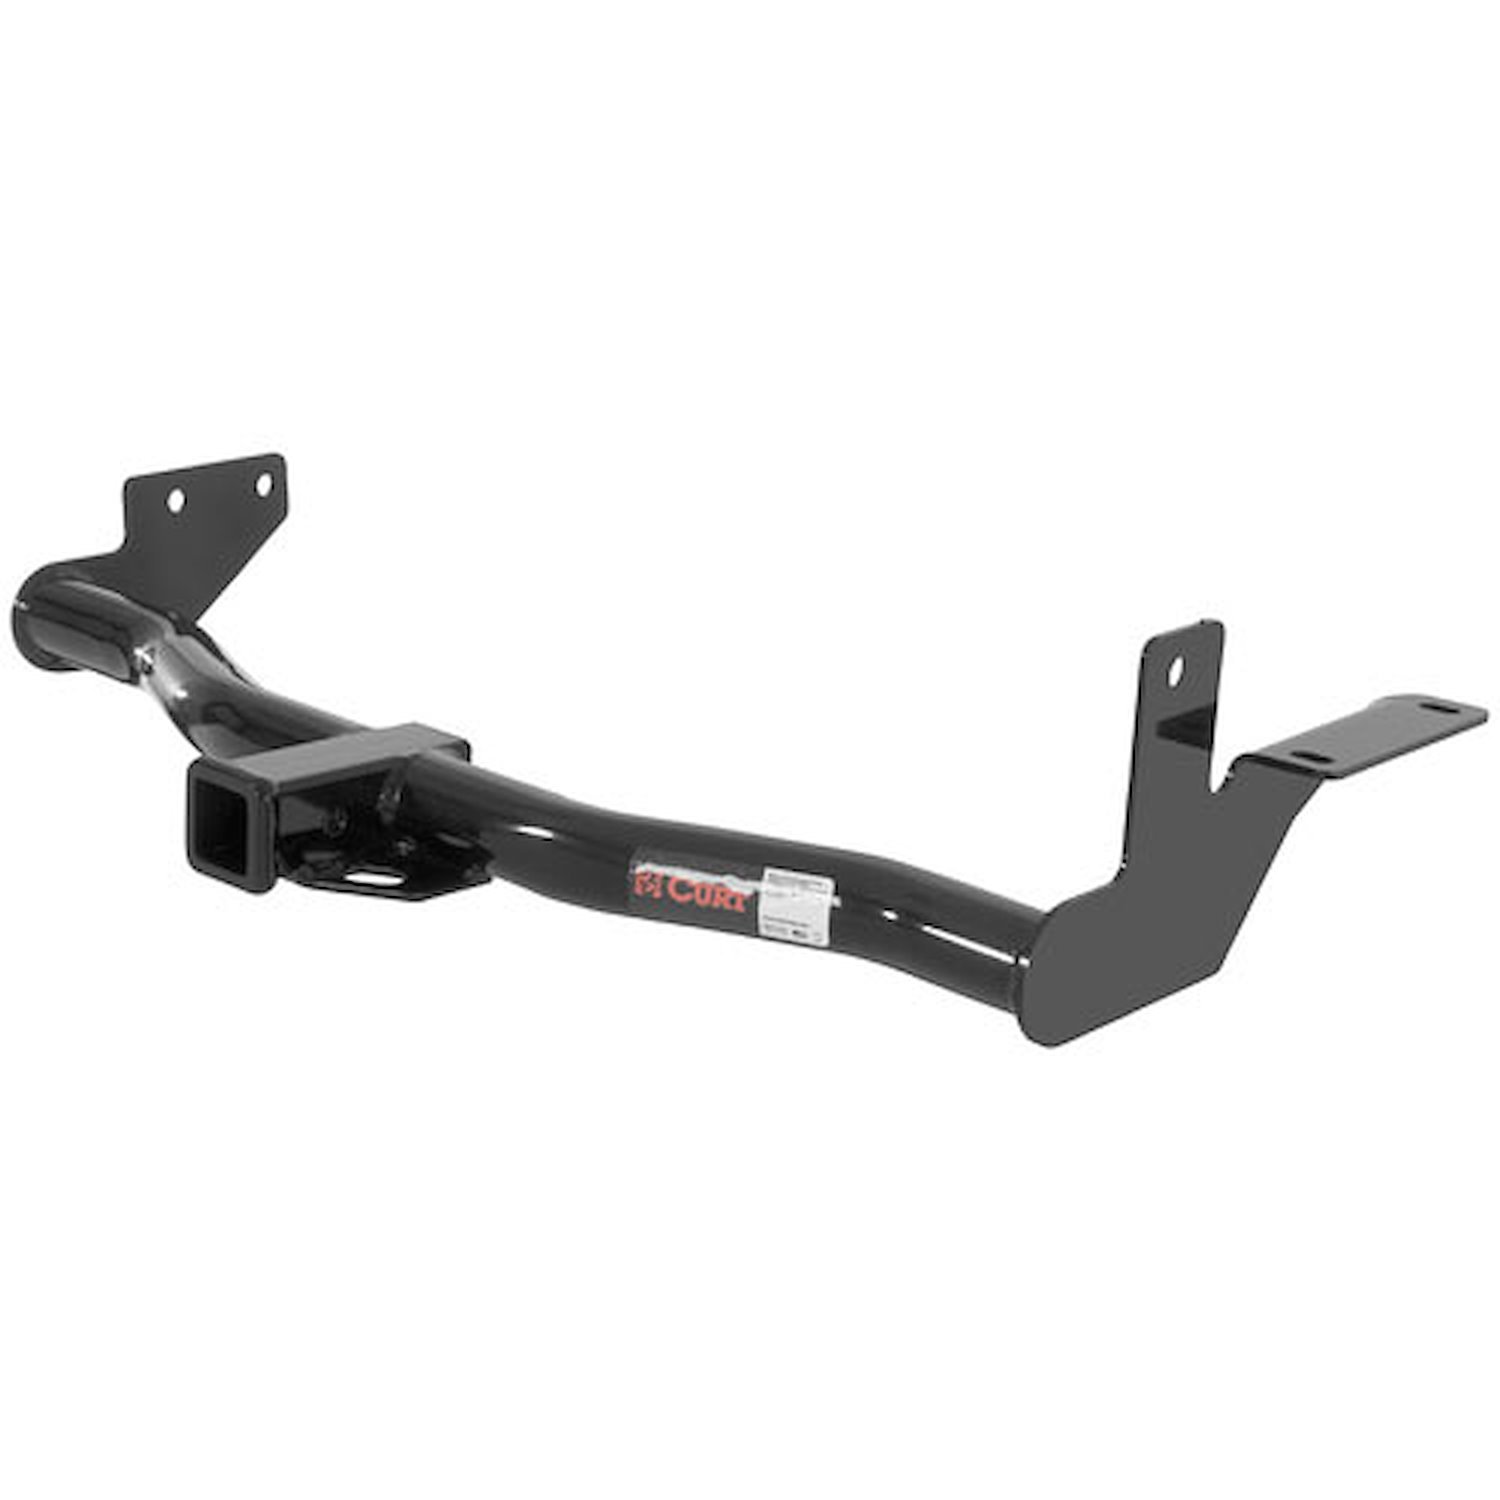 Round Tube Class 3 Receiver Hitch 1998-2002 Honda Passport with Spare under Vehicle